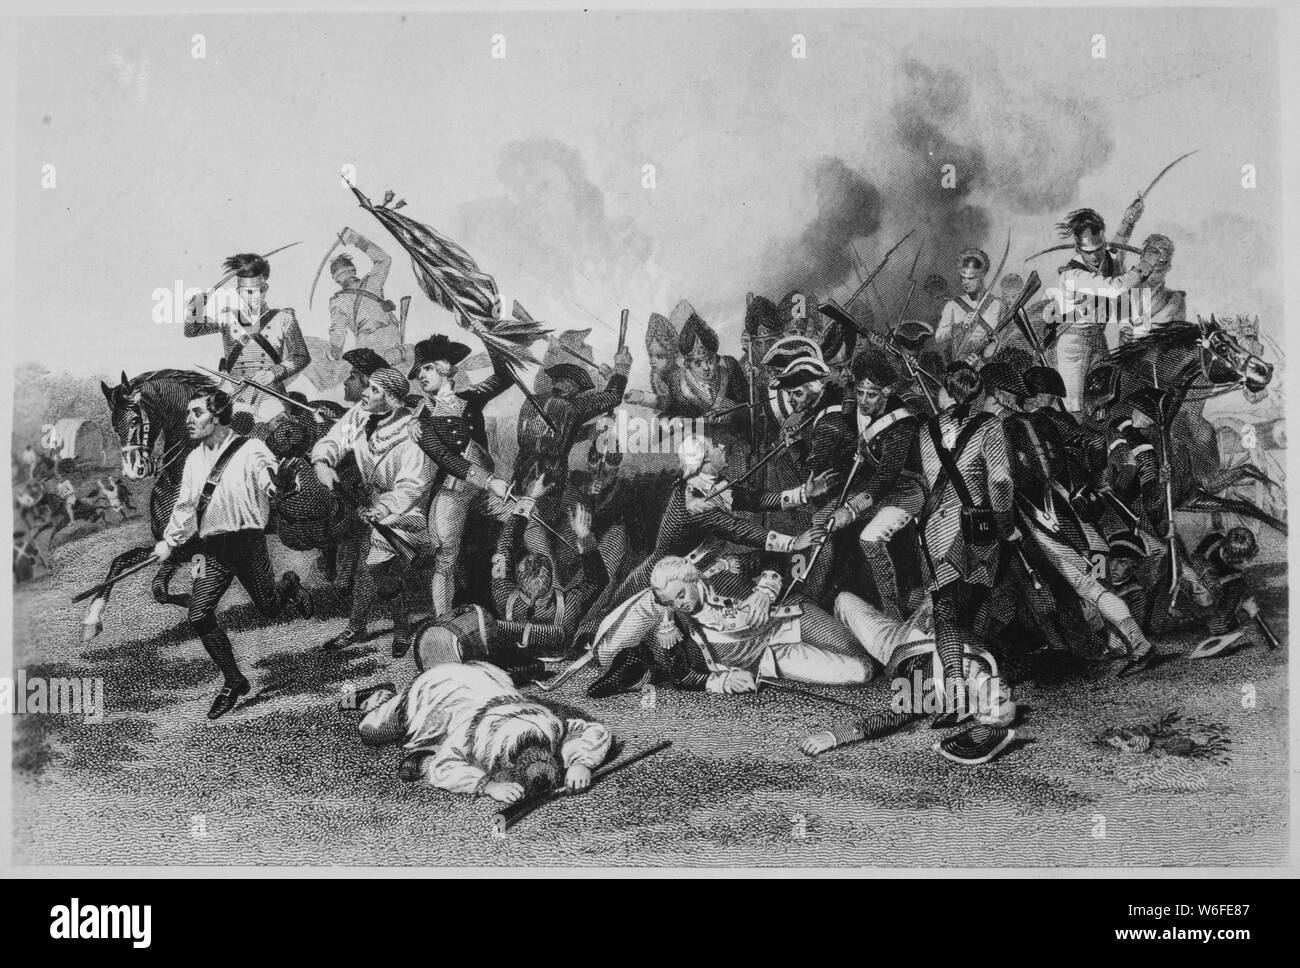 Battle of Camden-Death of De Kalb. August 1780. Copy of engraving after Alonzo Chappel., 1931 - 1932; General notes:  Use War and Conflict Number 41 when ordering a reproduction or requesting information about this image. Stock Photo